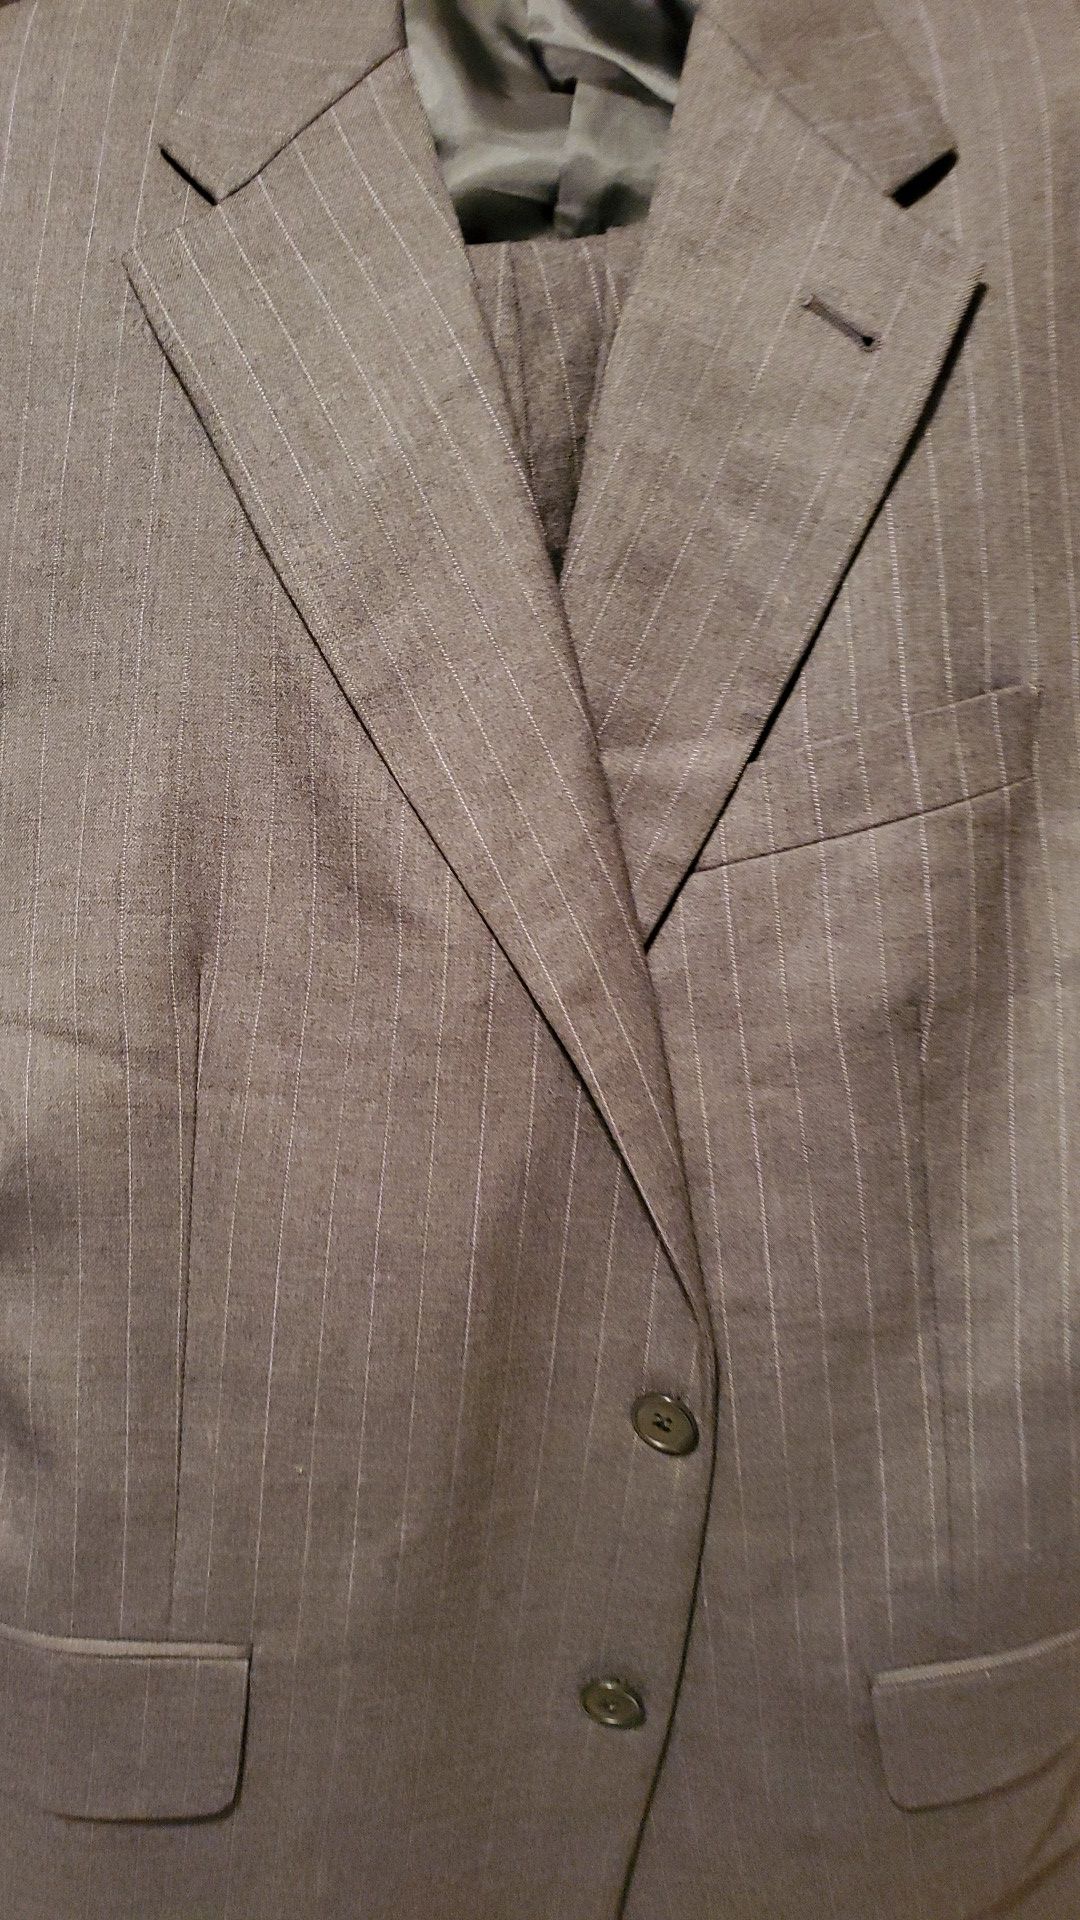 Burberry 100% wool suit size 40R